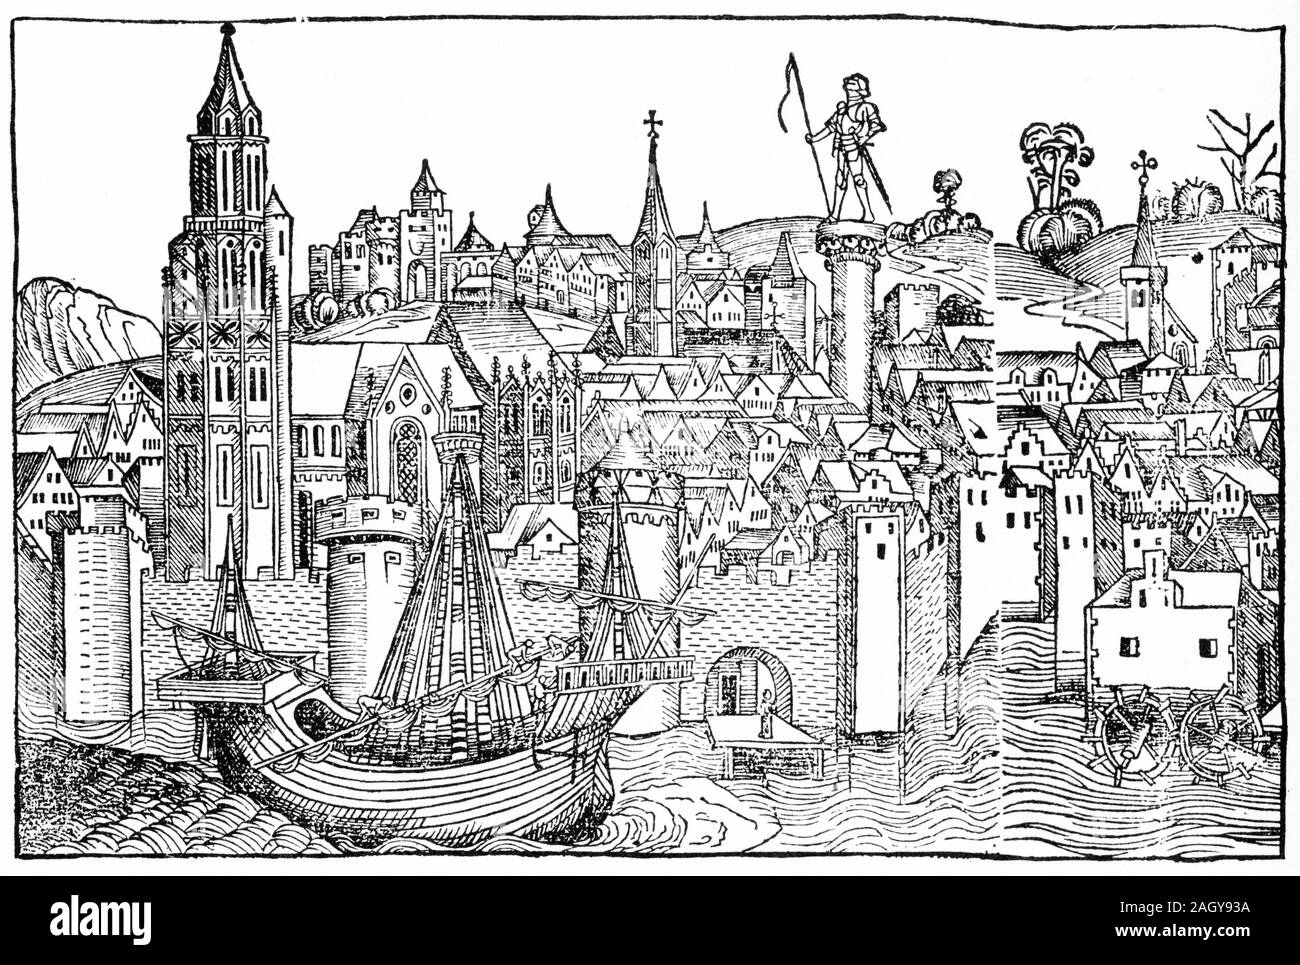 Engraving of the city of Magdeburg in the late 15th century, the city where Martin Luther arived for his schooling at the age of 14 Stock Photo